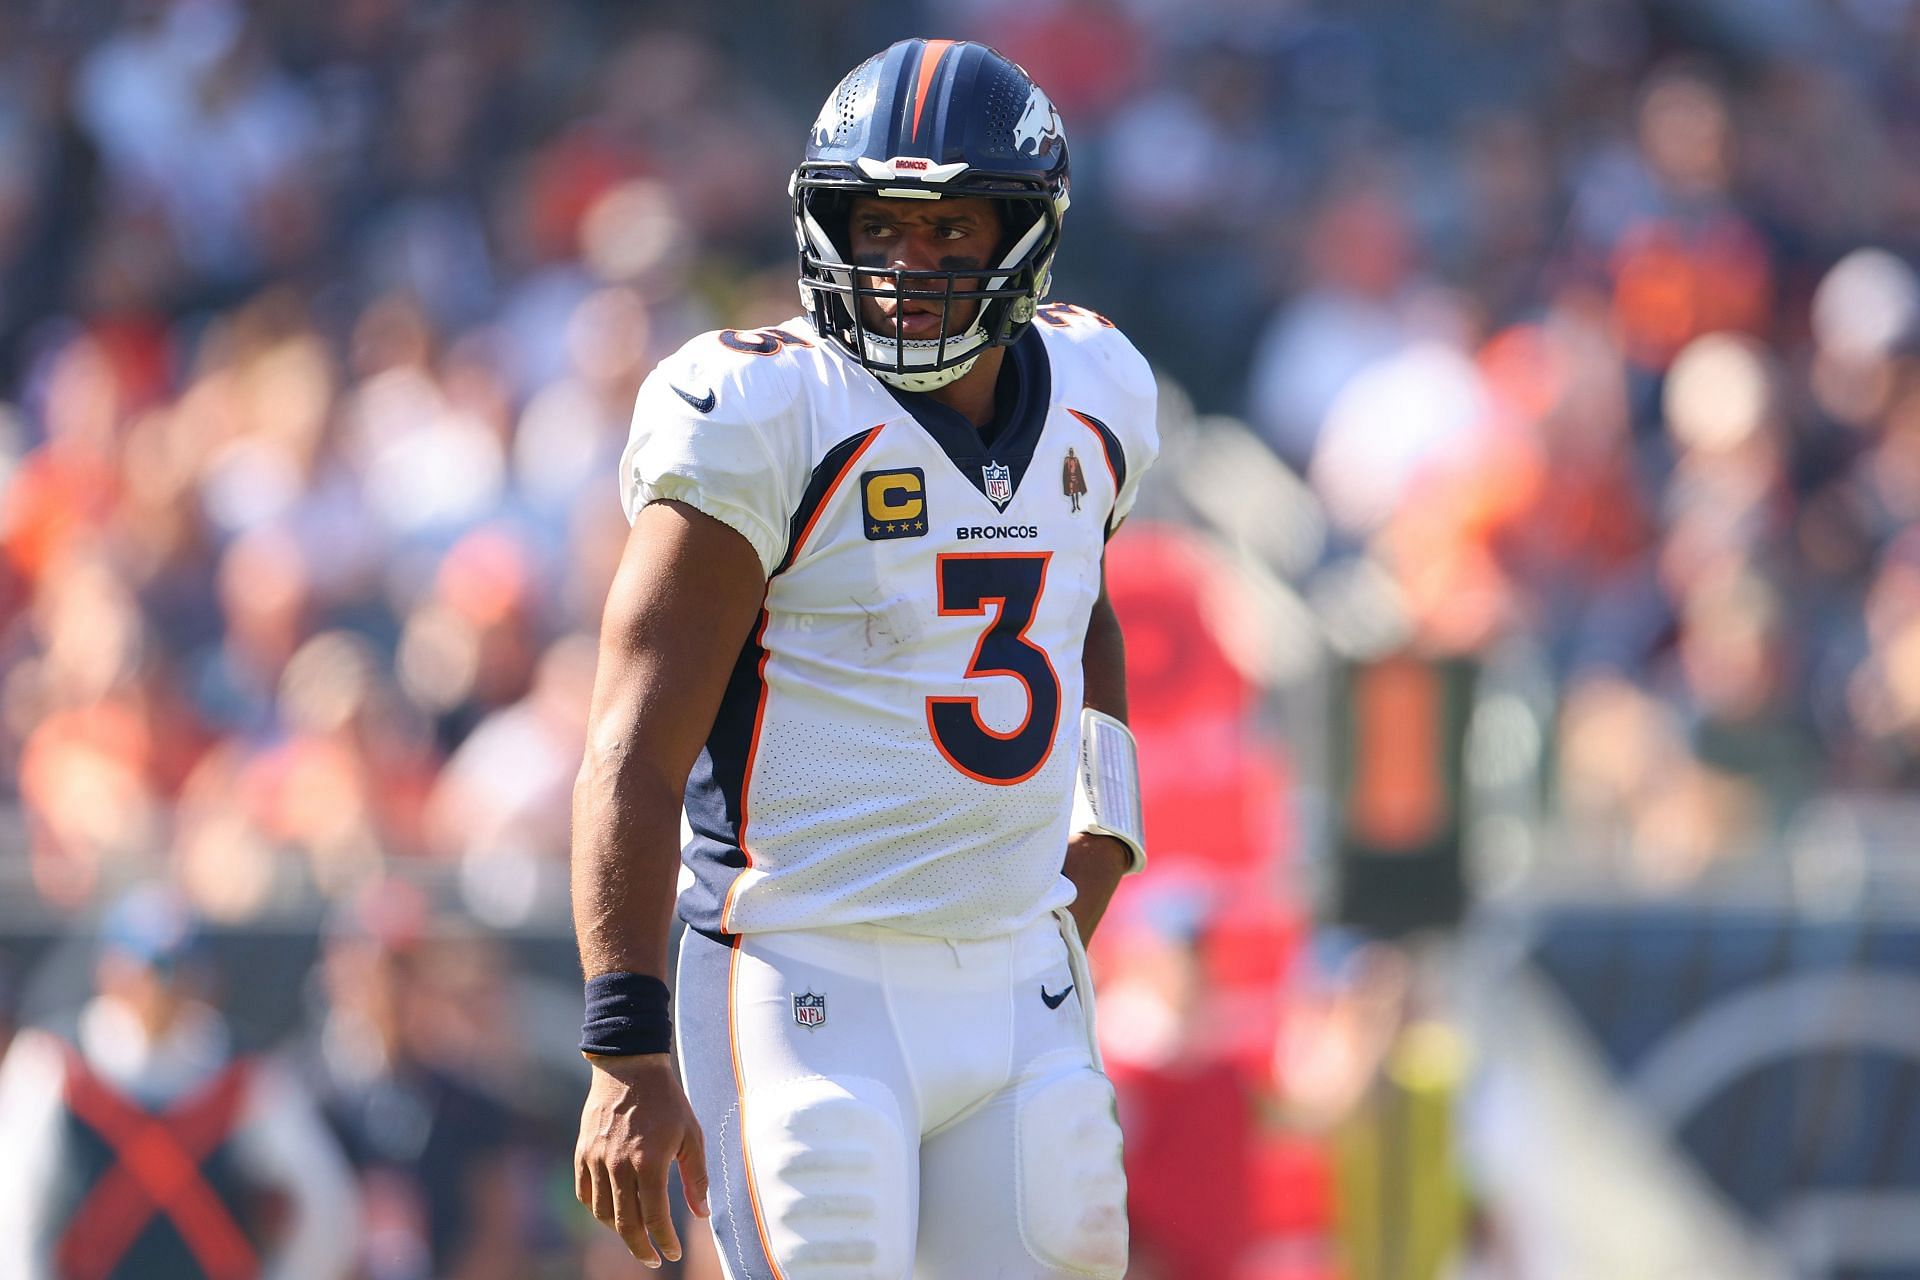 NFL Rumors: Broncos 'Will Listen' to Trade Offers on All Players